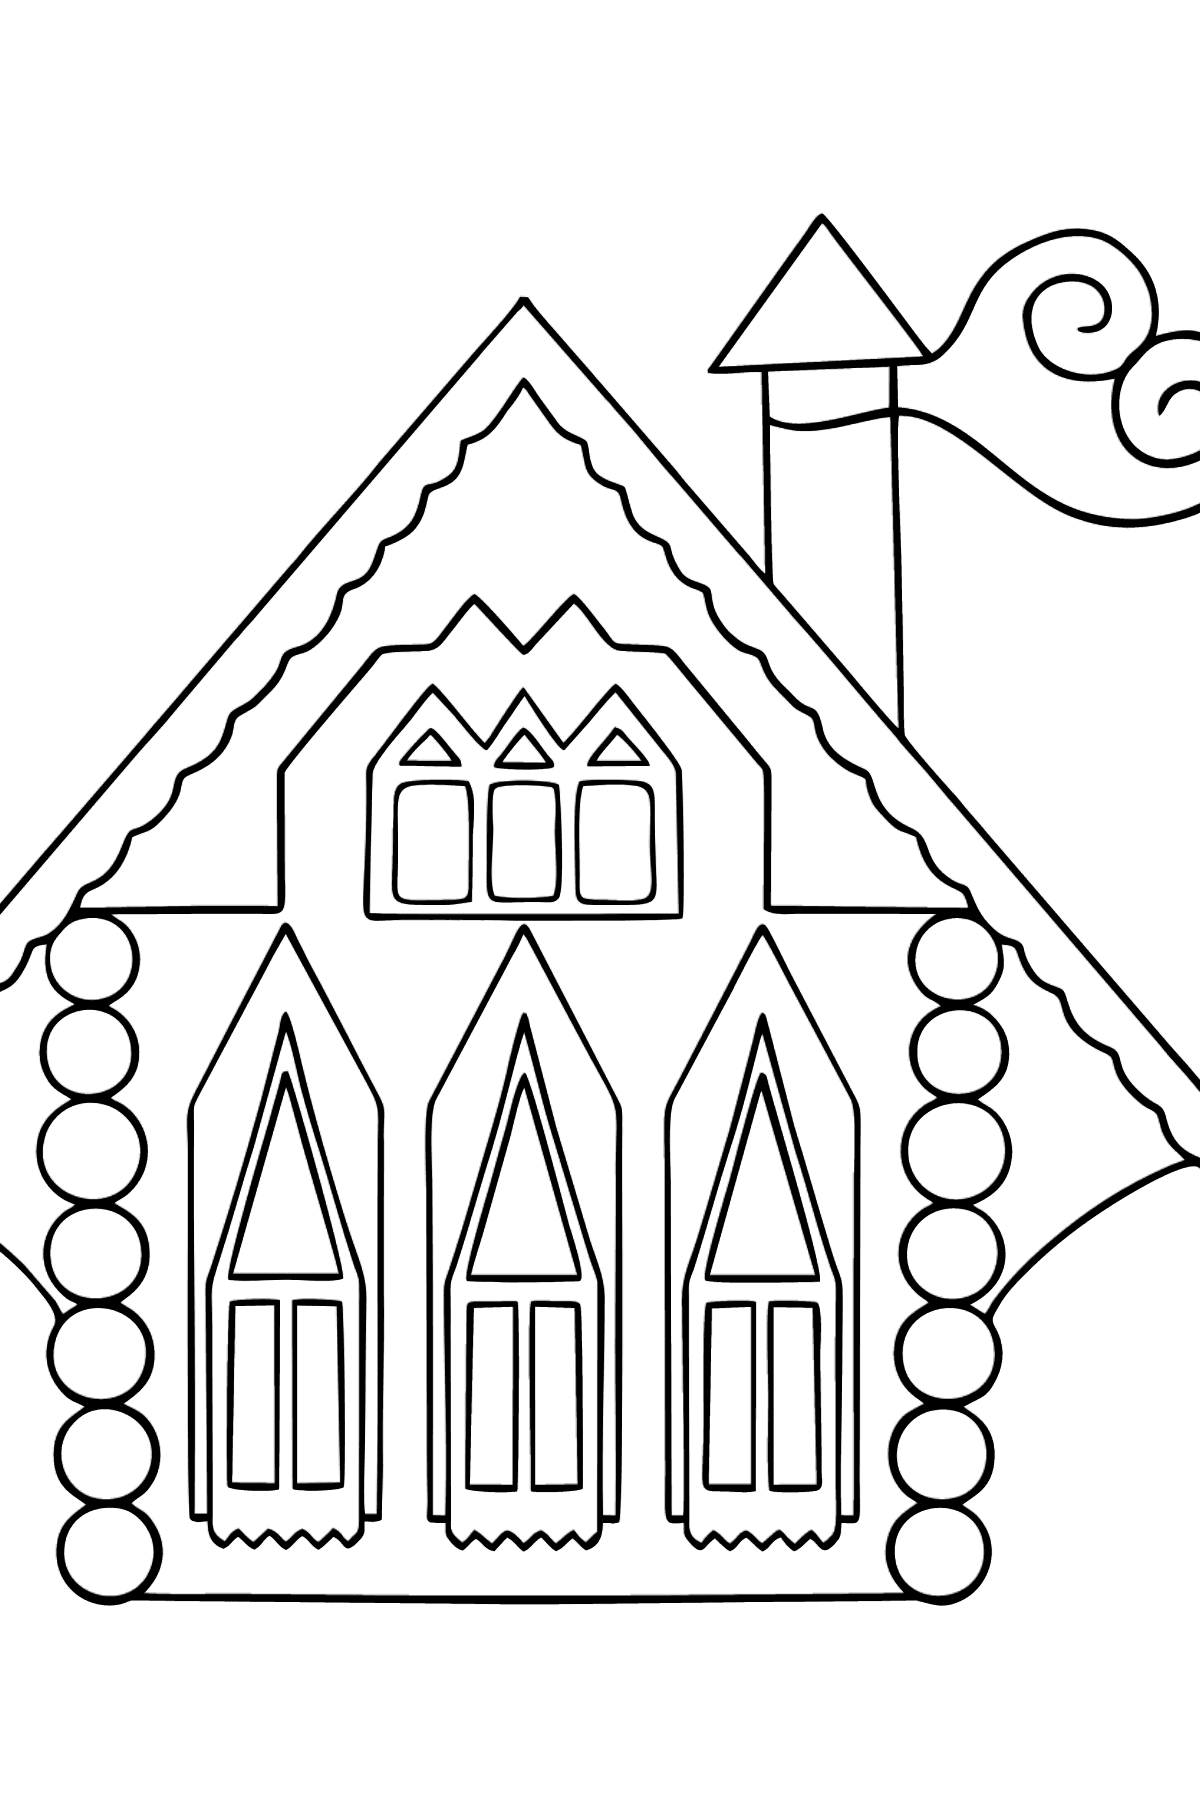 Rainbow House Coloring Page - Coloring Pages for Kids